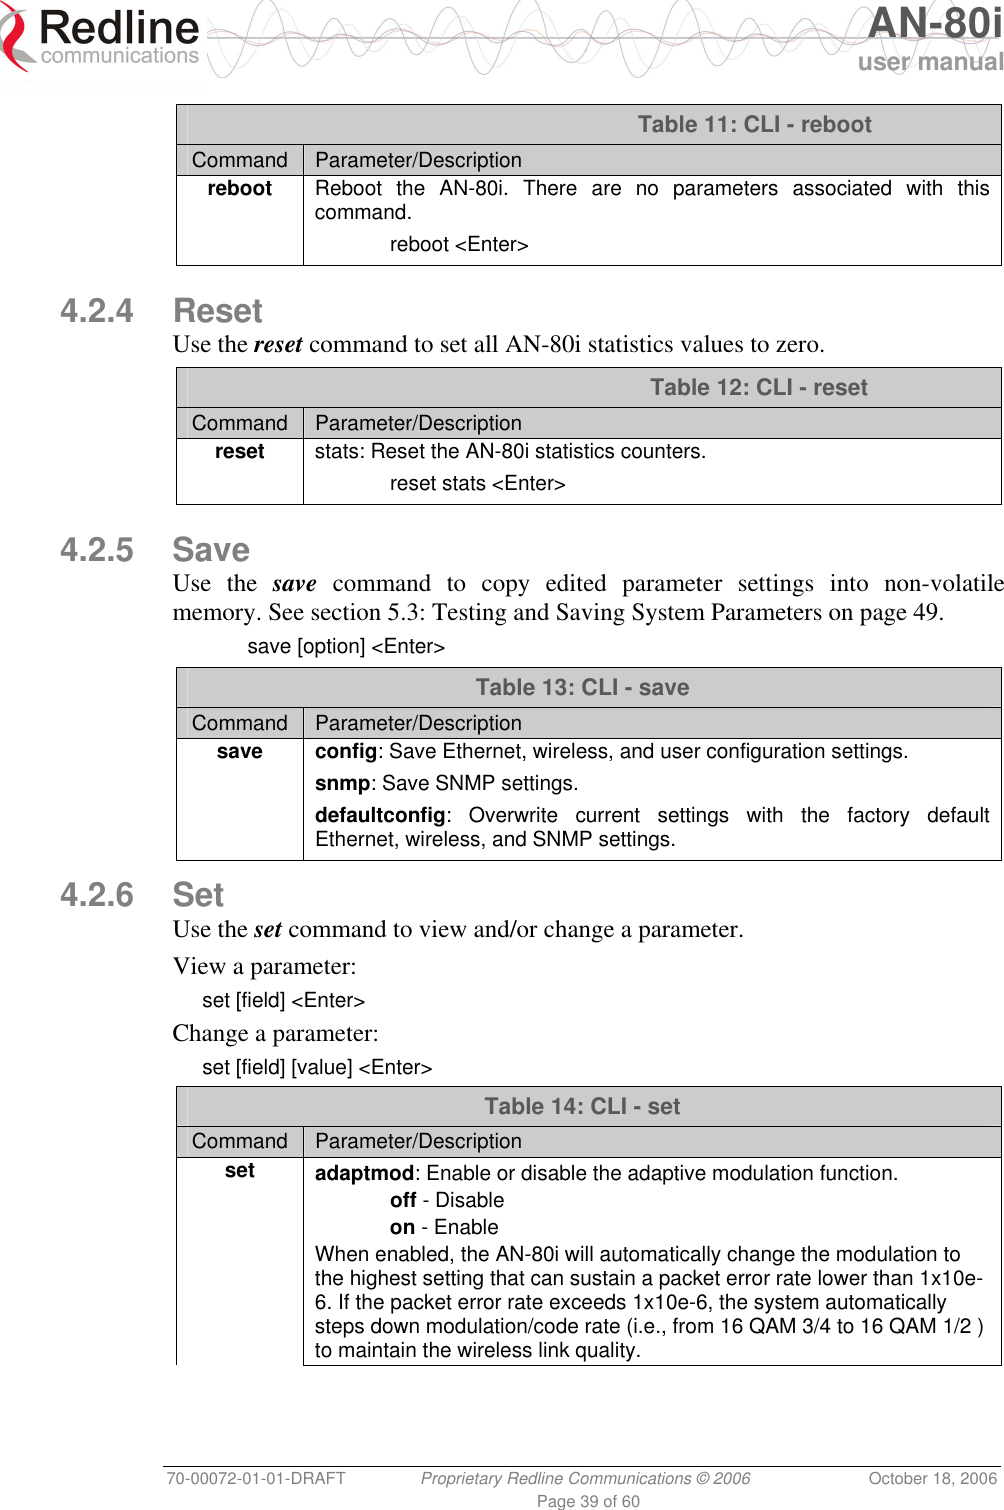   AN-80i user manual 70-00072-01-01-DRAFT  Proprietary Redline Communications © 2006  October 18, 2006 Page 39 of 60  Table 11: CLI - reboot Command  Parameter/Description reboot Reboot the AN-80i. There are no parameters associated with this command.  reboot &lt;Enter&gt;   4.2.4 Reset Use the reset command to set all AN-80i statistics values to zero.    Table 12: CLI - reset Command  Parameter/Description  reset stats: Reset the AN-80i statistics counters.  reset stats &lt;Enter&gt;   4.2.5 Save Use the save command to copy edited parameter settings into non-volatile memory. See section 5.3: Testing and Saving System Parameters on page 49.  save [option] &lt;Enter&gt; Table 13: CLI - save Command  Parameter/Description save config: Save Ethernet, wireless, and user configuration settings. snmp: Save SNMP settings. defaultconfig: Overwrite current settings with the factory default Ethernet, wireless, and SNMP settings.  4.2.6 Set Use the set command to view and/or change a parameter. View a parameter: set [field] &lt;Enter&gt; Change a parameter: set [field] [value] &lt;Enter&gt; Table 14: CLI - set Command  Parameter/Description set adaptmod: Enable or disable the adaptive modulation function.  off - Disable  on - Enable When enabled, the AN-80i will automatically change the modulation to the highest setting that can sustain a packet error rate lower than 1x10e-6. If the packet error rate exceeds 1x10e-6, the system automatically steps down modulation/code rate (i.e., from 16 QAM 3/4 to 16 QAM 1/2 ) to maintain the wireless link quality. 